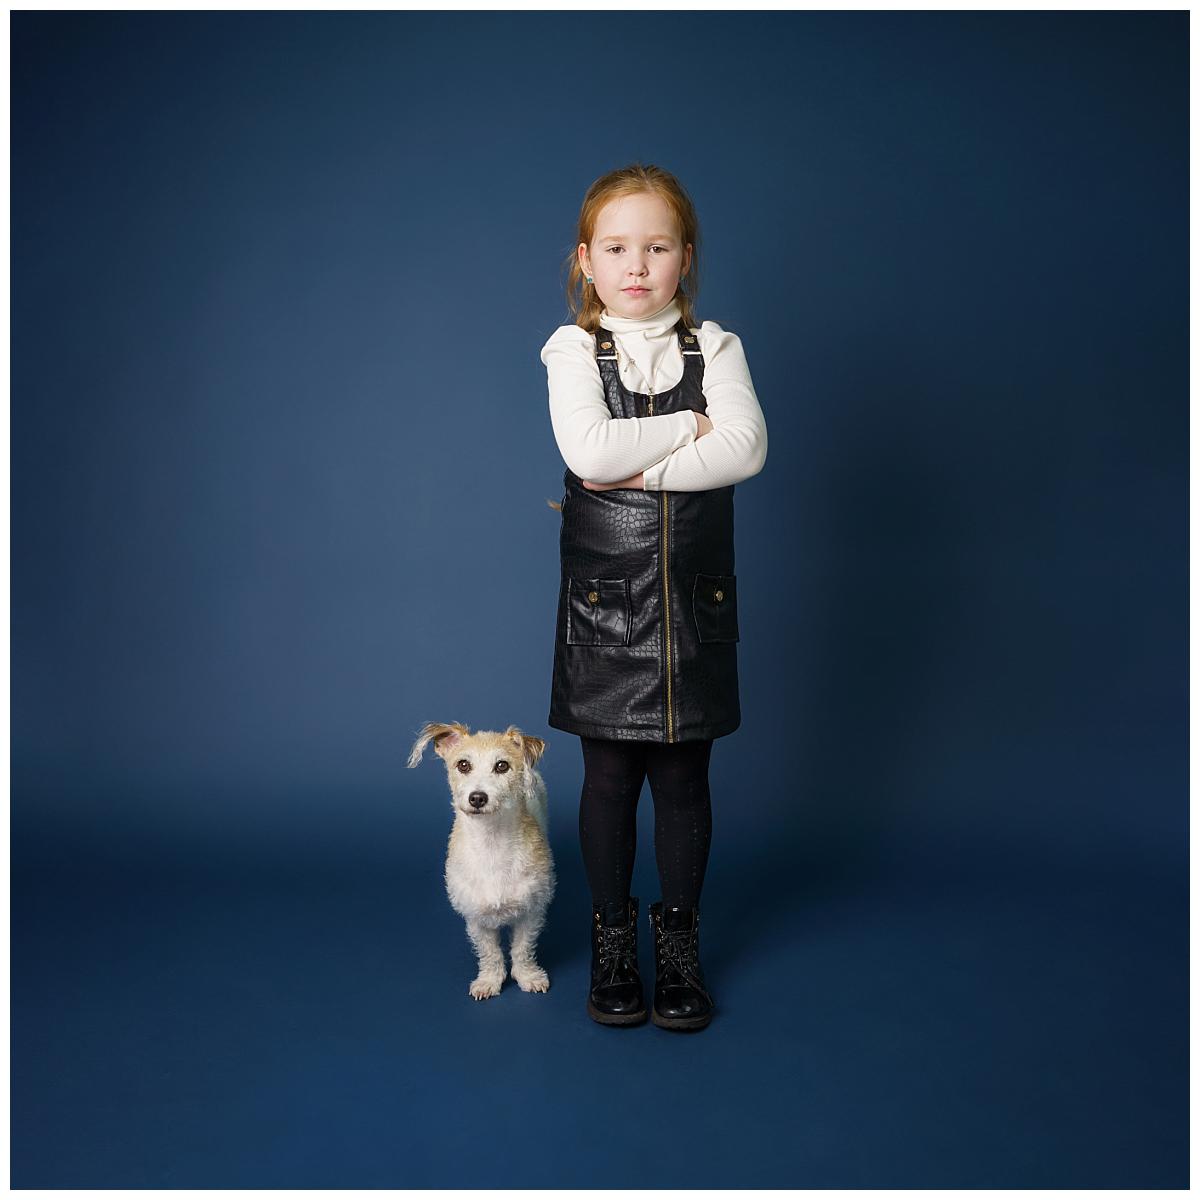 Professional pet photograph, taken by Northern Ireland's top pet photographer in Belfast of small dog with a little girl on a navy backdrop